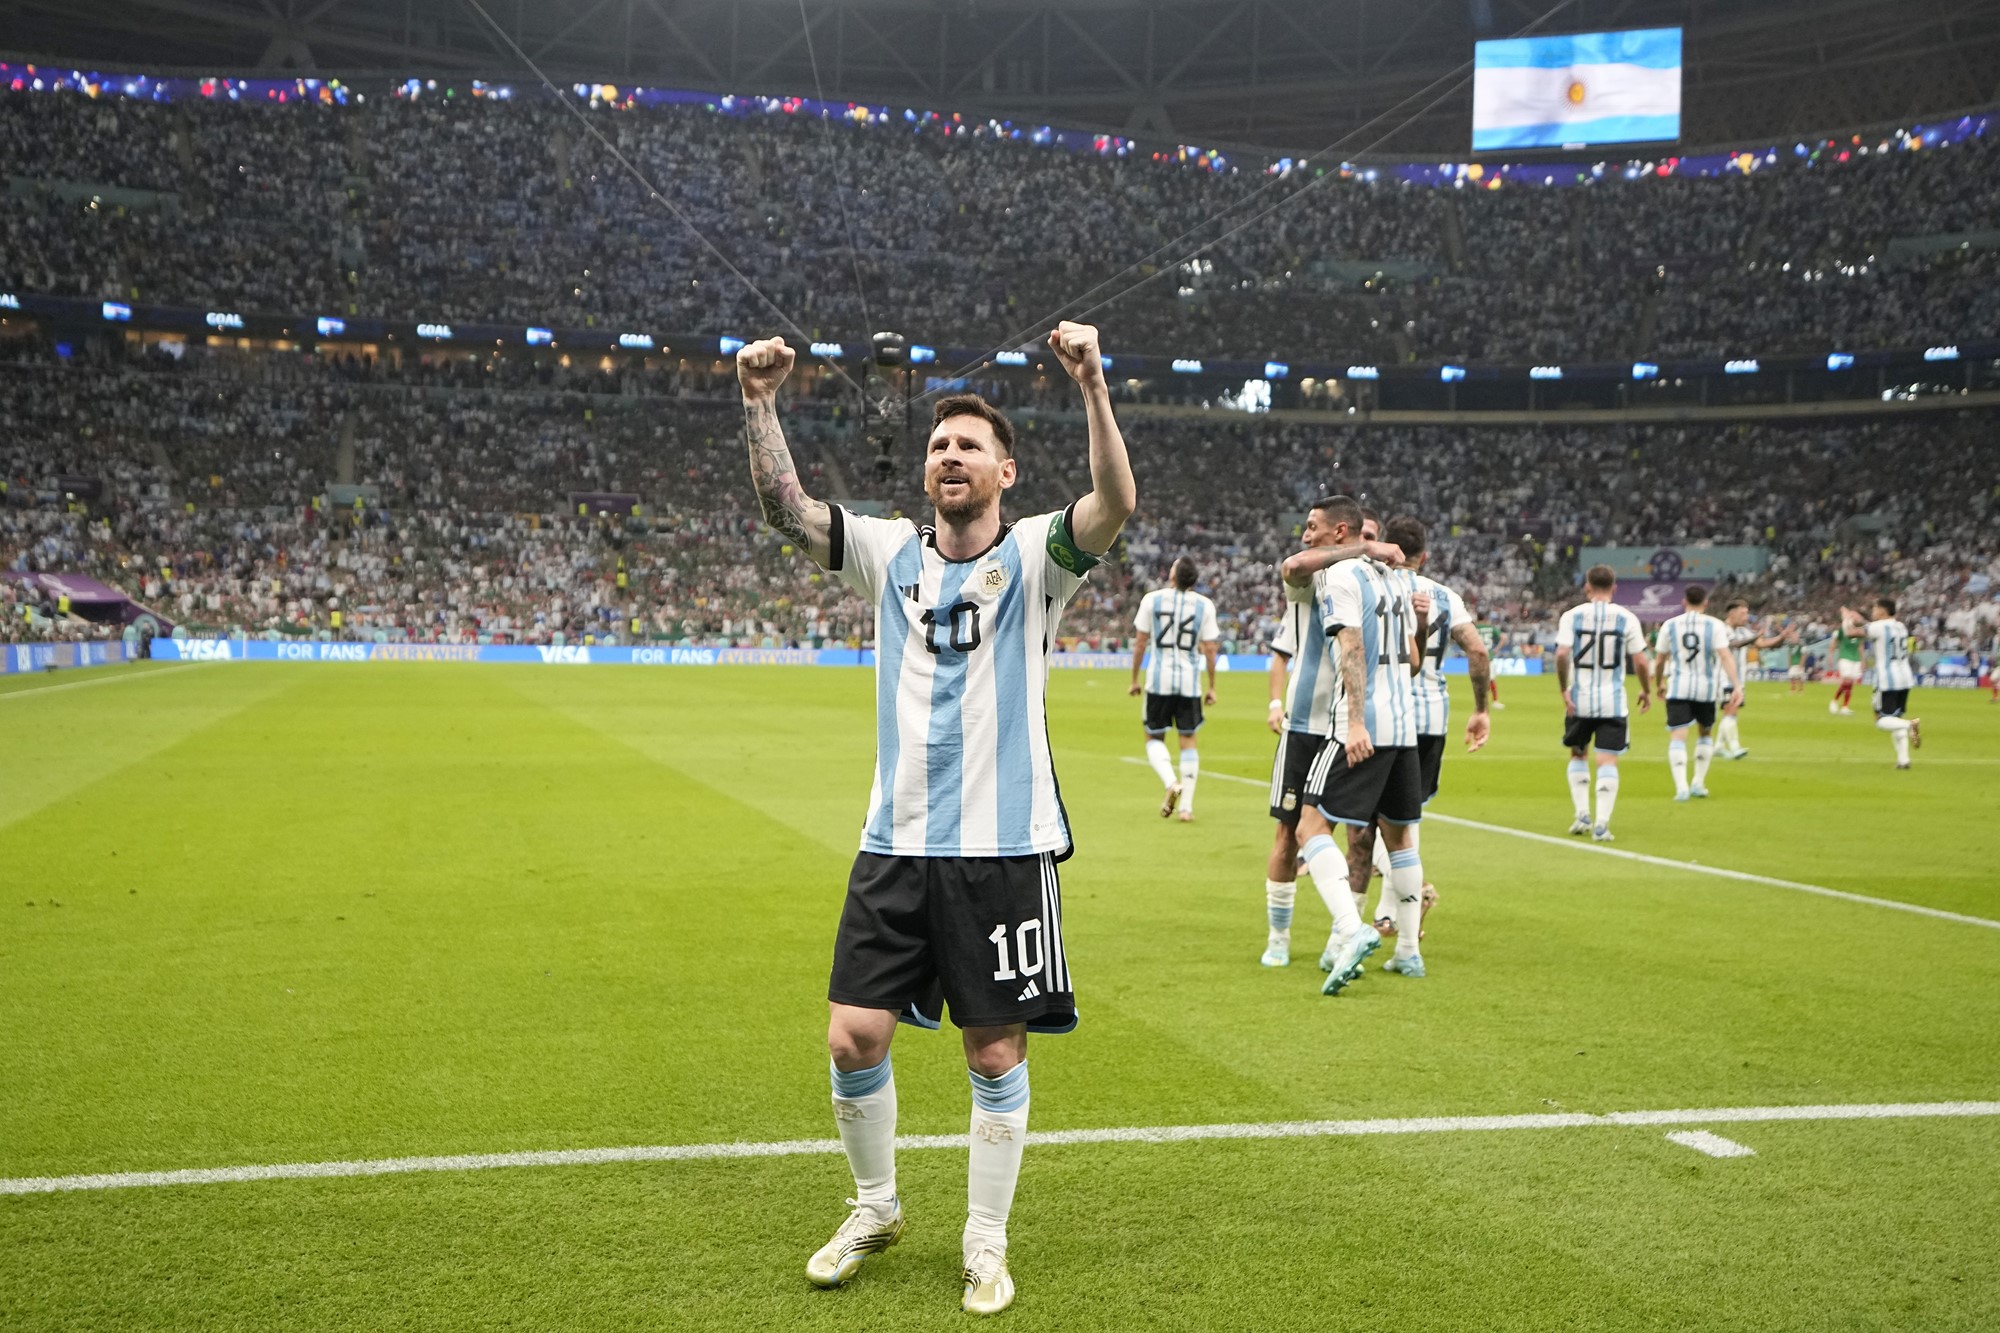 Argentina's Lionel Messi raises his hands above his head in celebration as he salutes the crowd after a win.